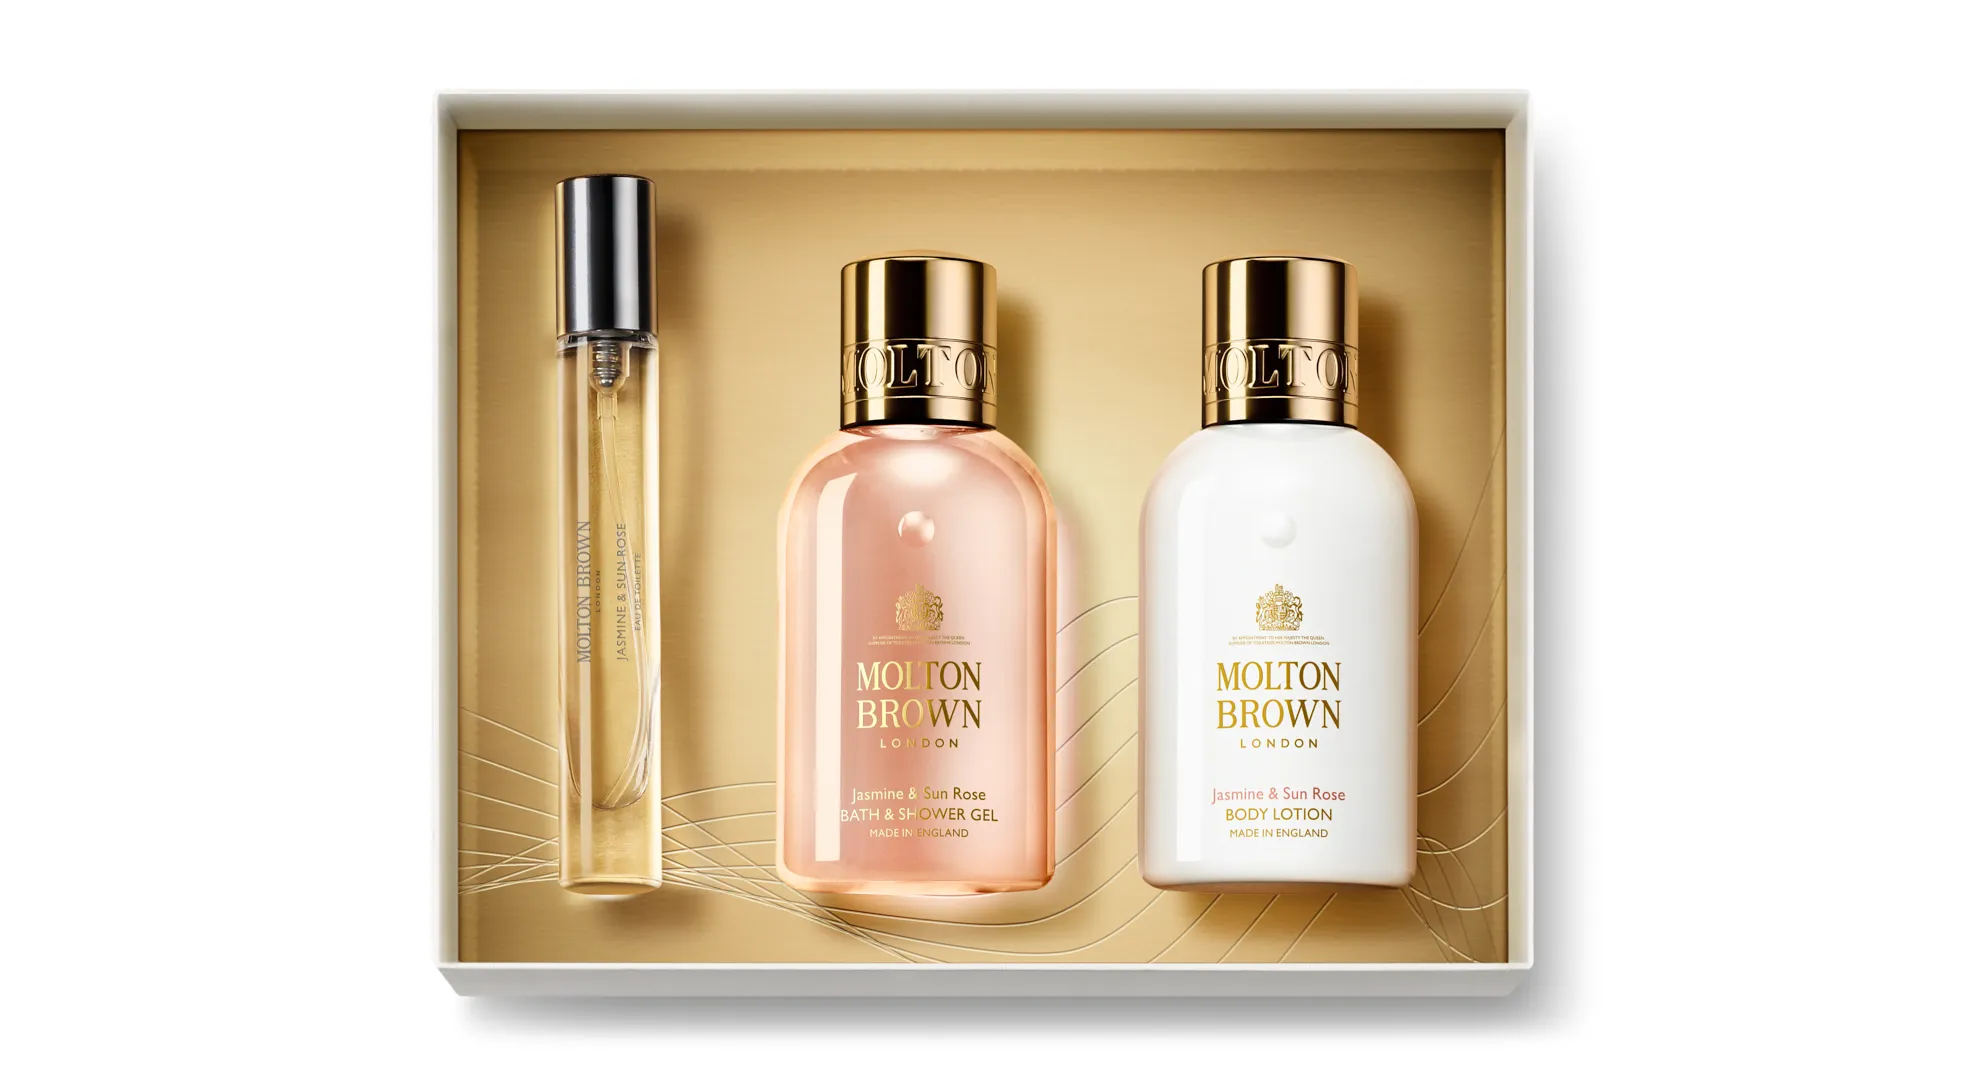 molton brown jasmine and sun rose travel collection eur32